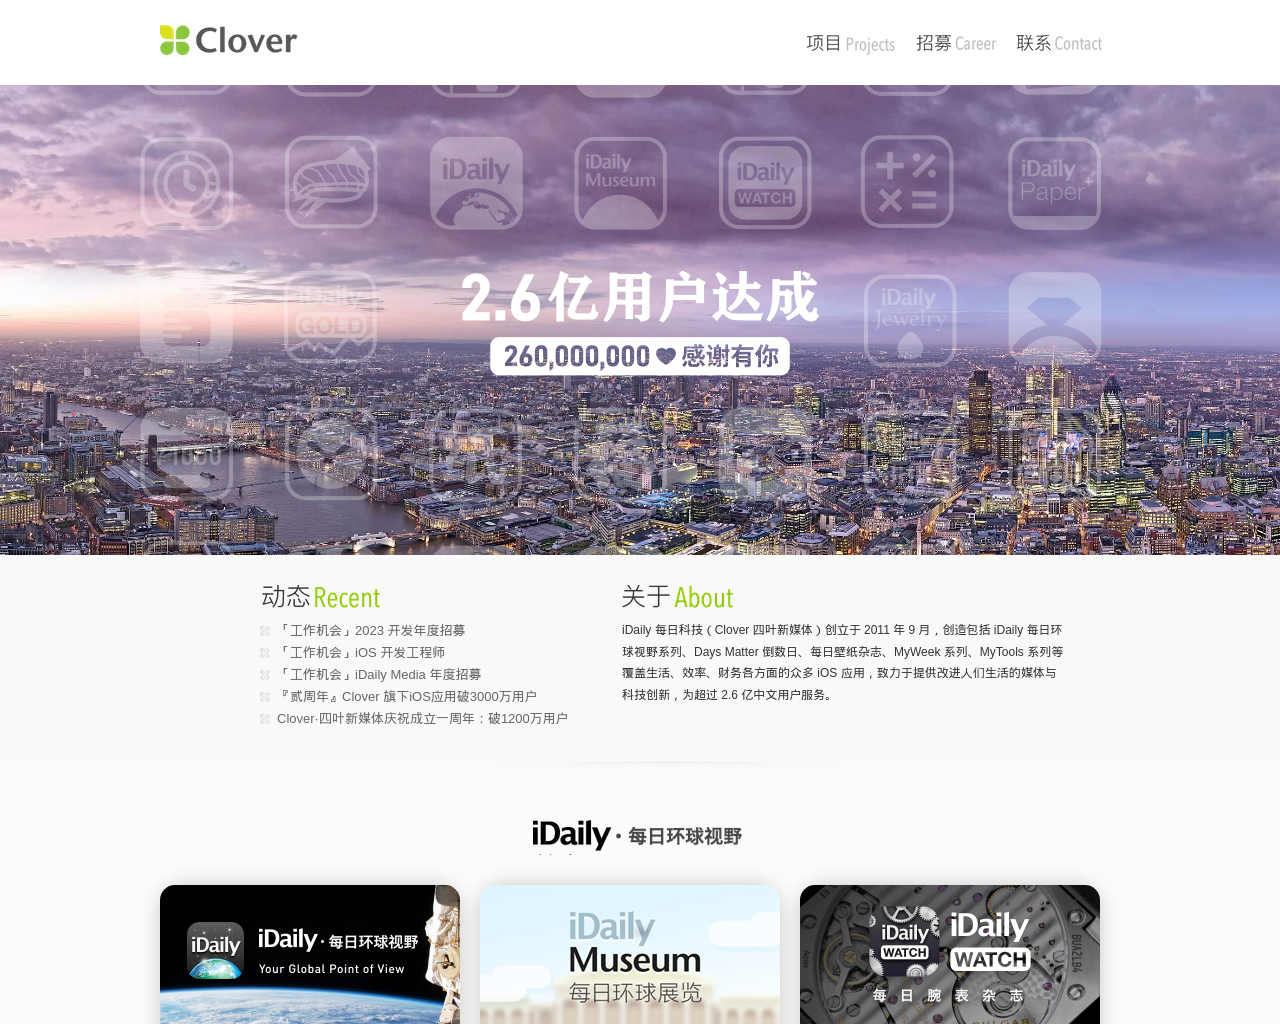 clover.ly